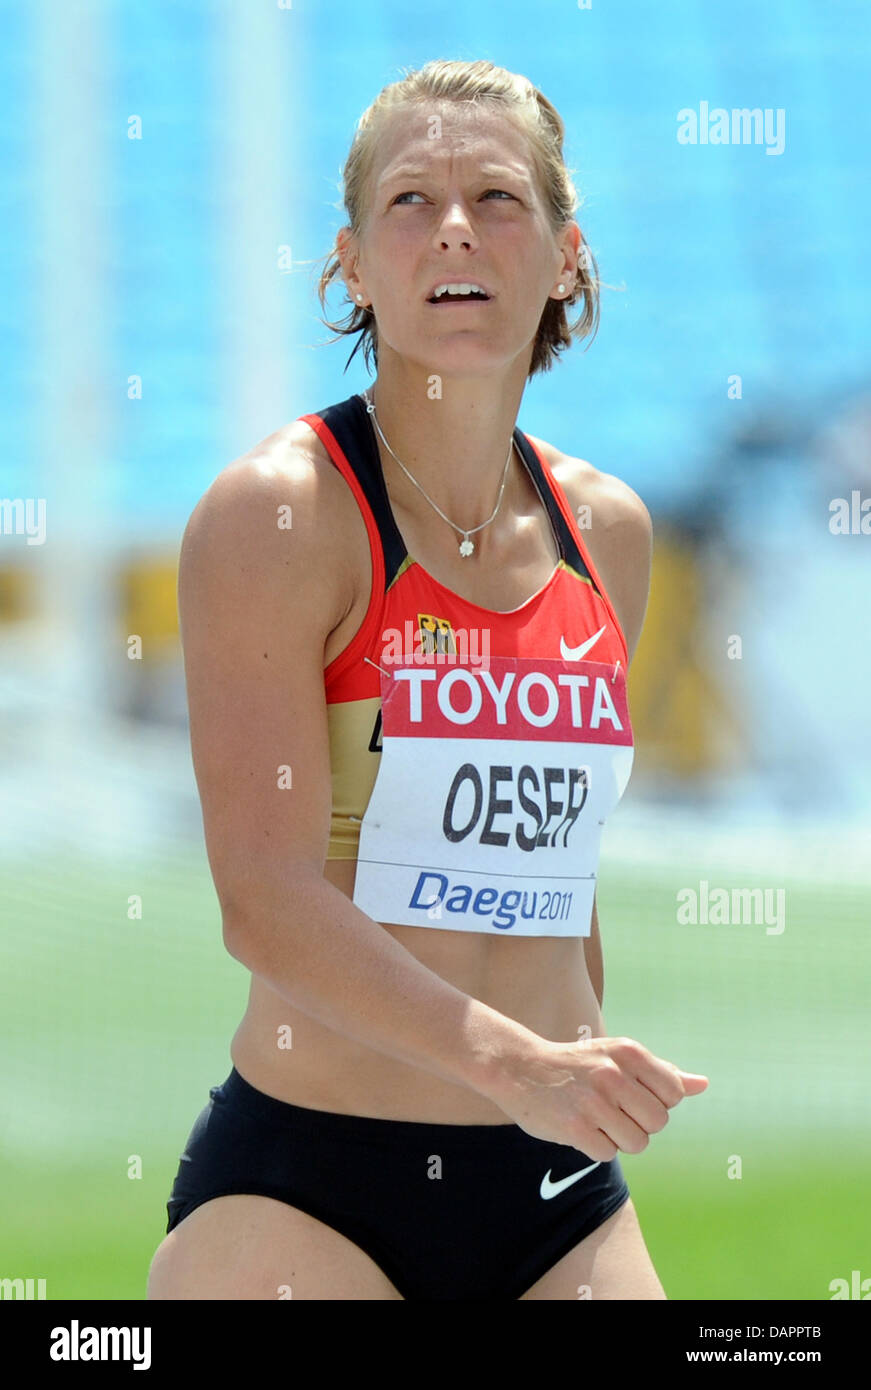 Jennifer Oeser of Germany reacts in High Jump event of the Heptathlon competition at the 13th IAAF World Championships in Athletics, in Daegu, Republic of Korea, 29 August 2011. Photo: Rainer Jensen dpa Stock Photo